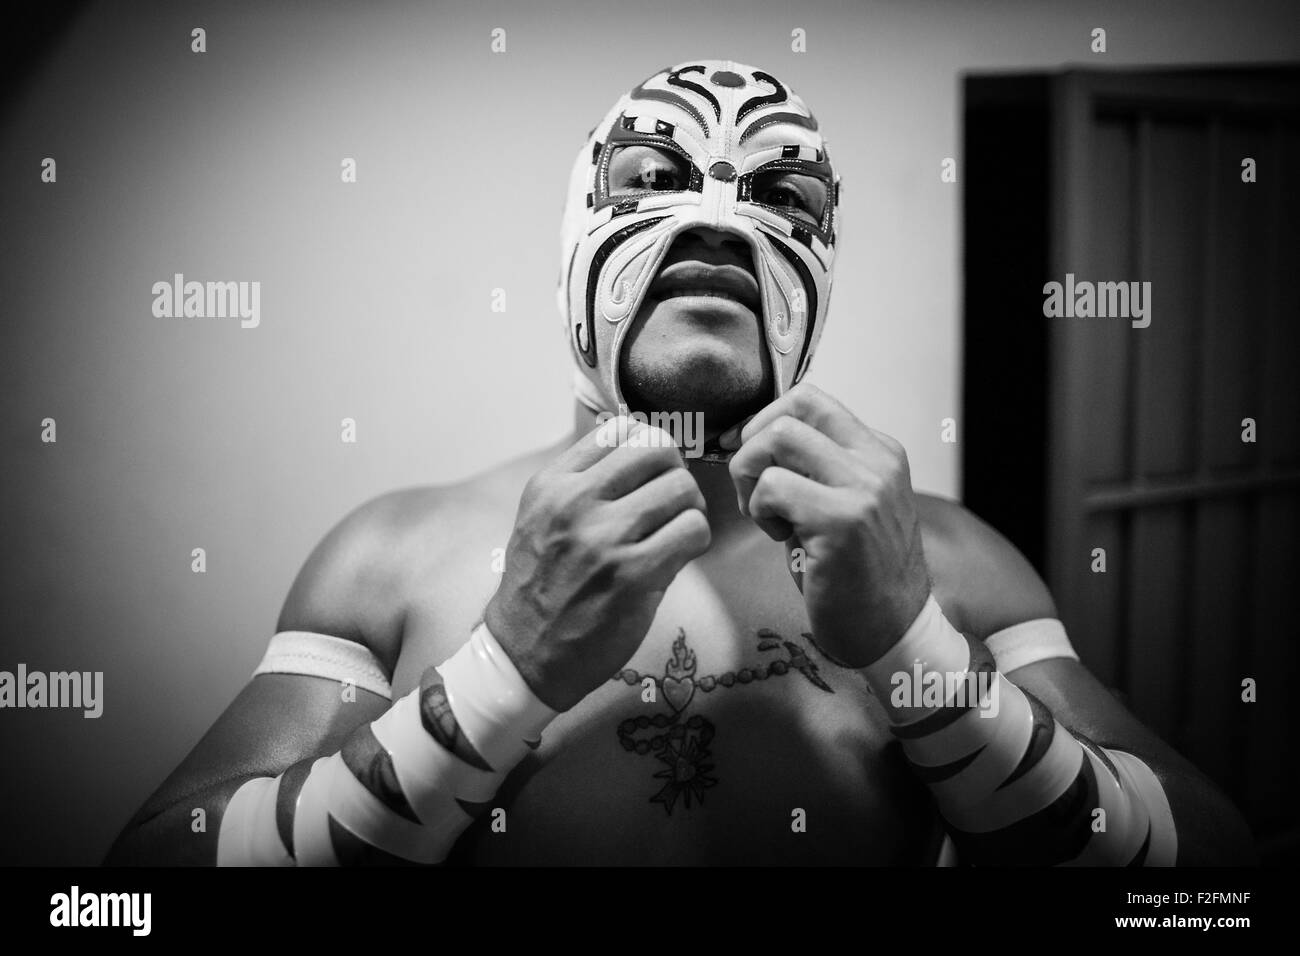 Mexico City, Mexico. 8th Sep, 2015. Luchador Triton prepares prior to the lucha libre at Arena Mexico in Mexico City, capital of Mexico, on Sept. 8, 2015. Lucha Libre is authentic Mexican free wrestling and features strong men in mysterious and elaborate masks. Triton, 28 years old, is considered as one of the young promises of the World Wrestling Council for Lucha Libre. Arena Mexico, also known as the "Cathedral of Lucha Libre", is the biggest arena in the country for this kind of matches. In 2015, Arena Mexico will host the 82nd anniversary of the CMLL. © Pedro Mera/Xinhua/Alamy Live News Stock Photo